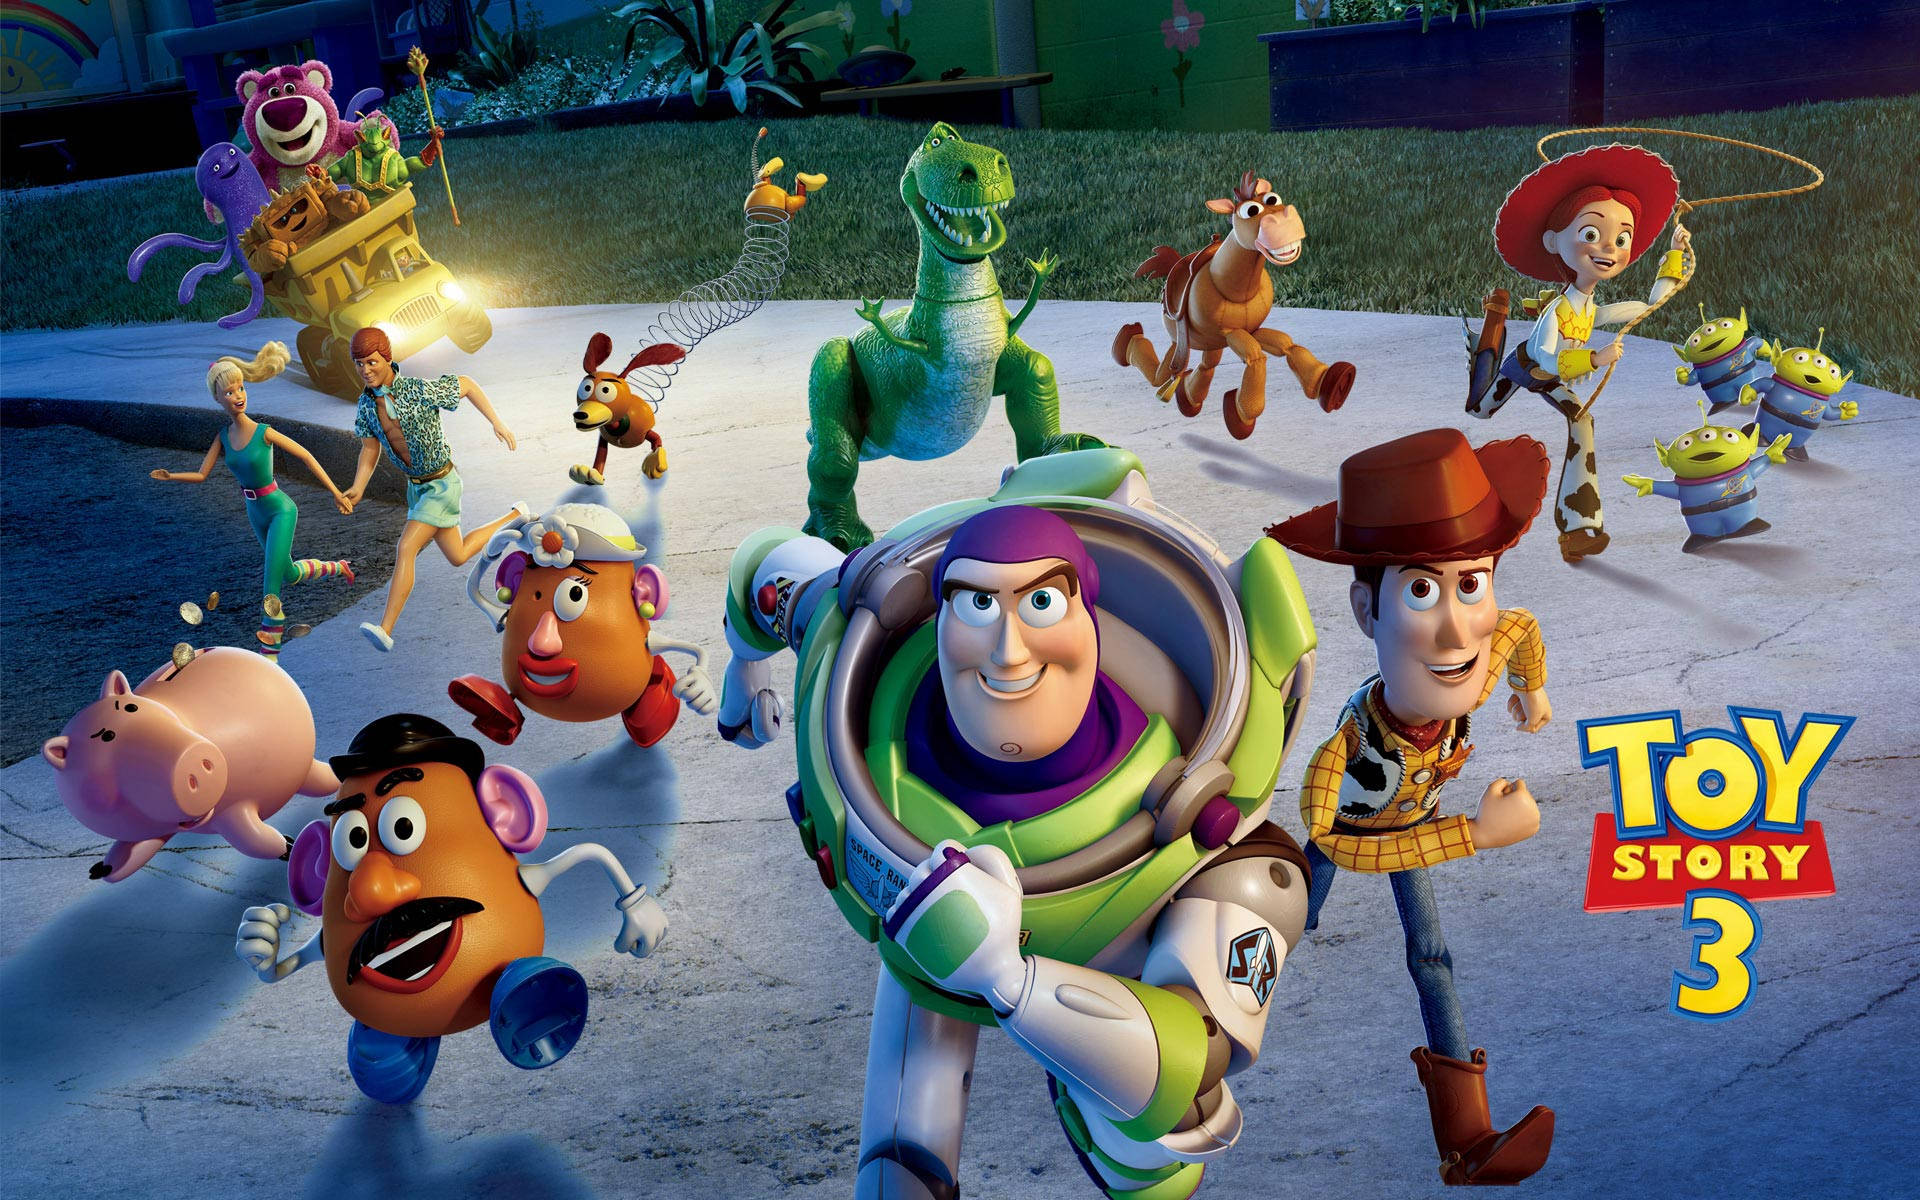 100+] Toy Story 3 Pictures For Free | Wallpapers.Com